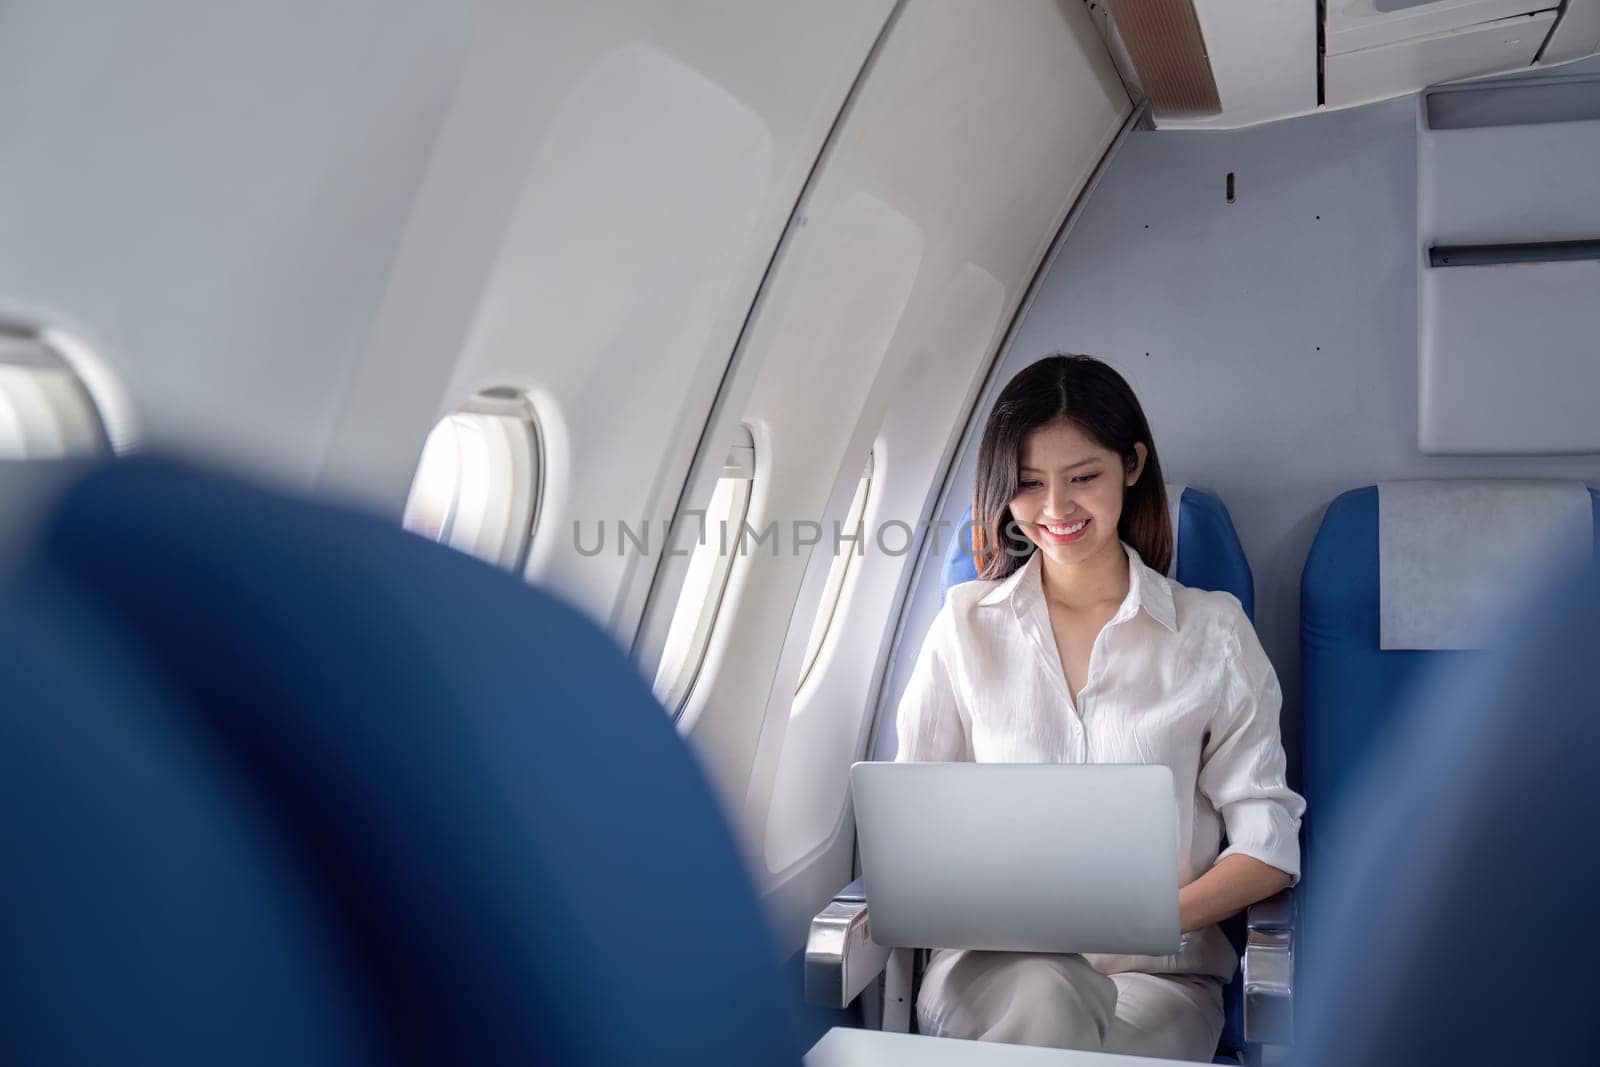 Businesswoman Traveling on Airplane Using Laptop for Work, Professional Female Executive in Modern Aircraft Cabin, Corporate Travel, Business Trip, Technology, and Connectivity in Flight by nateemee